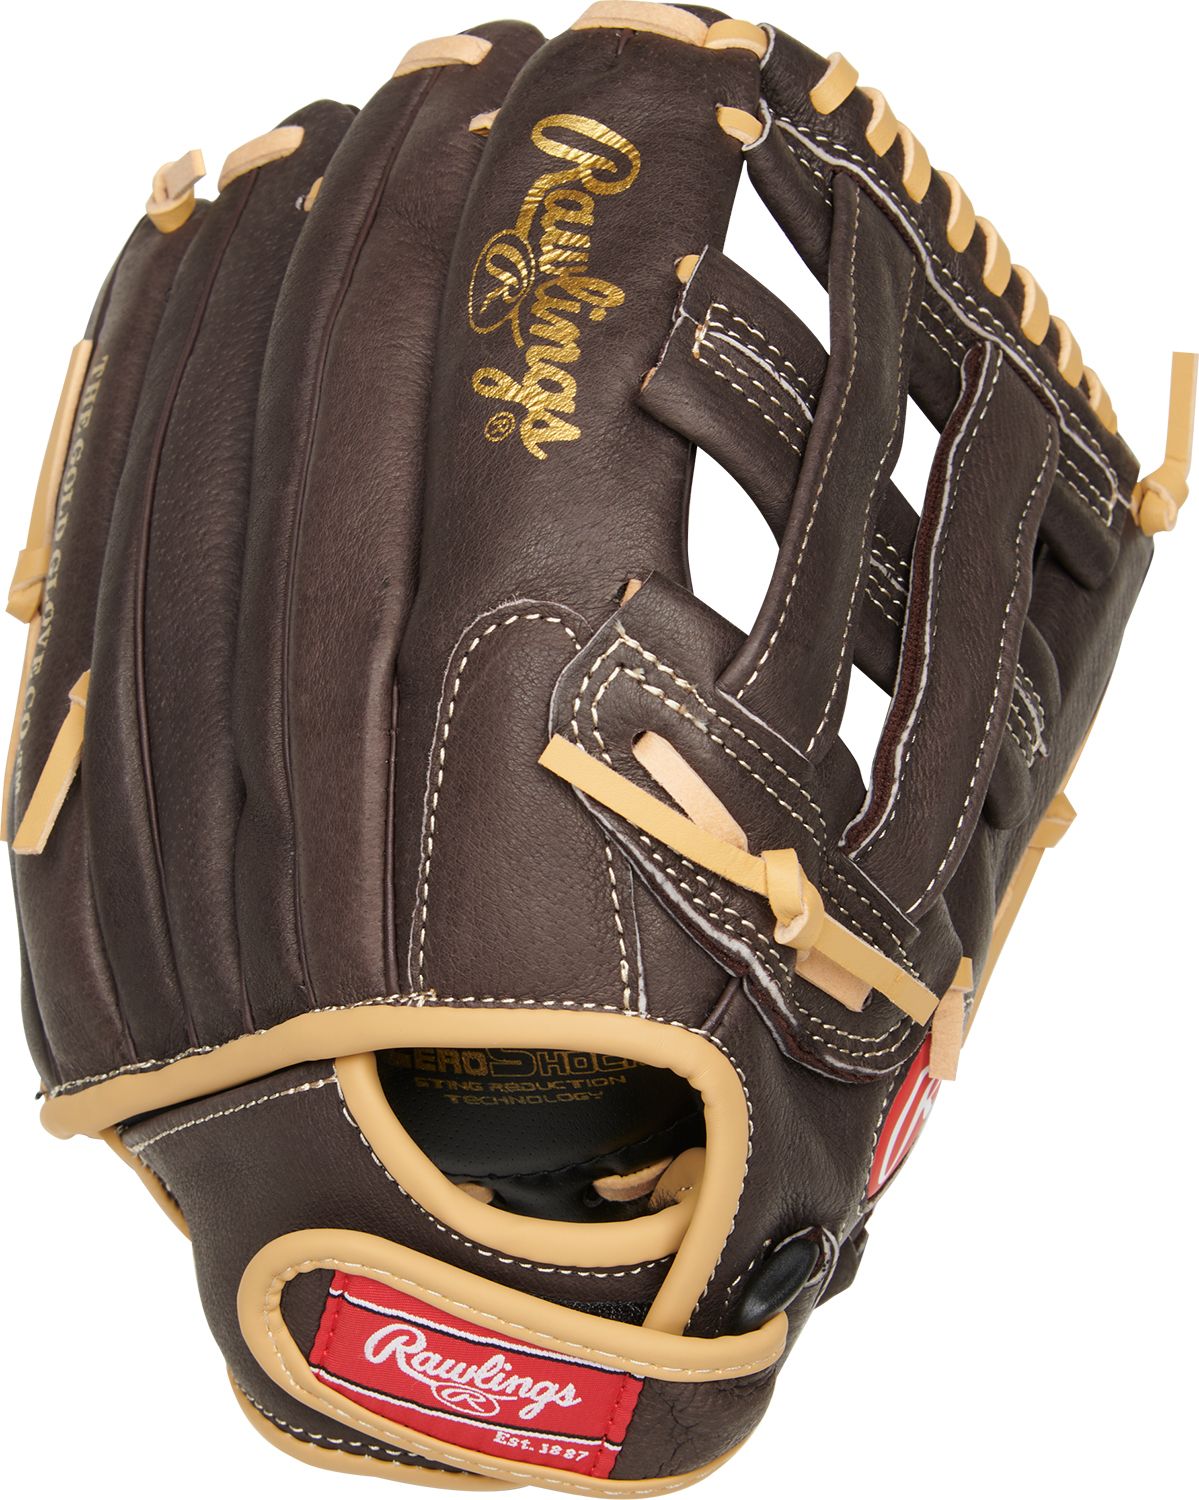 Rawlings 11.5'' Youth Highlight Series Glove